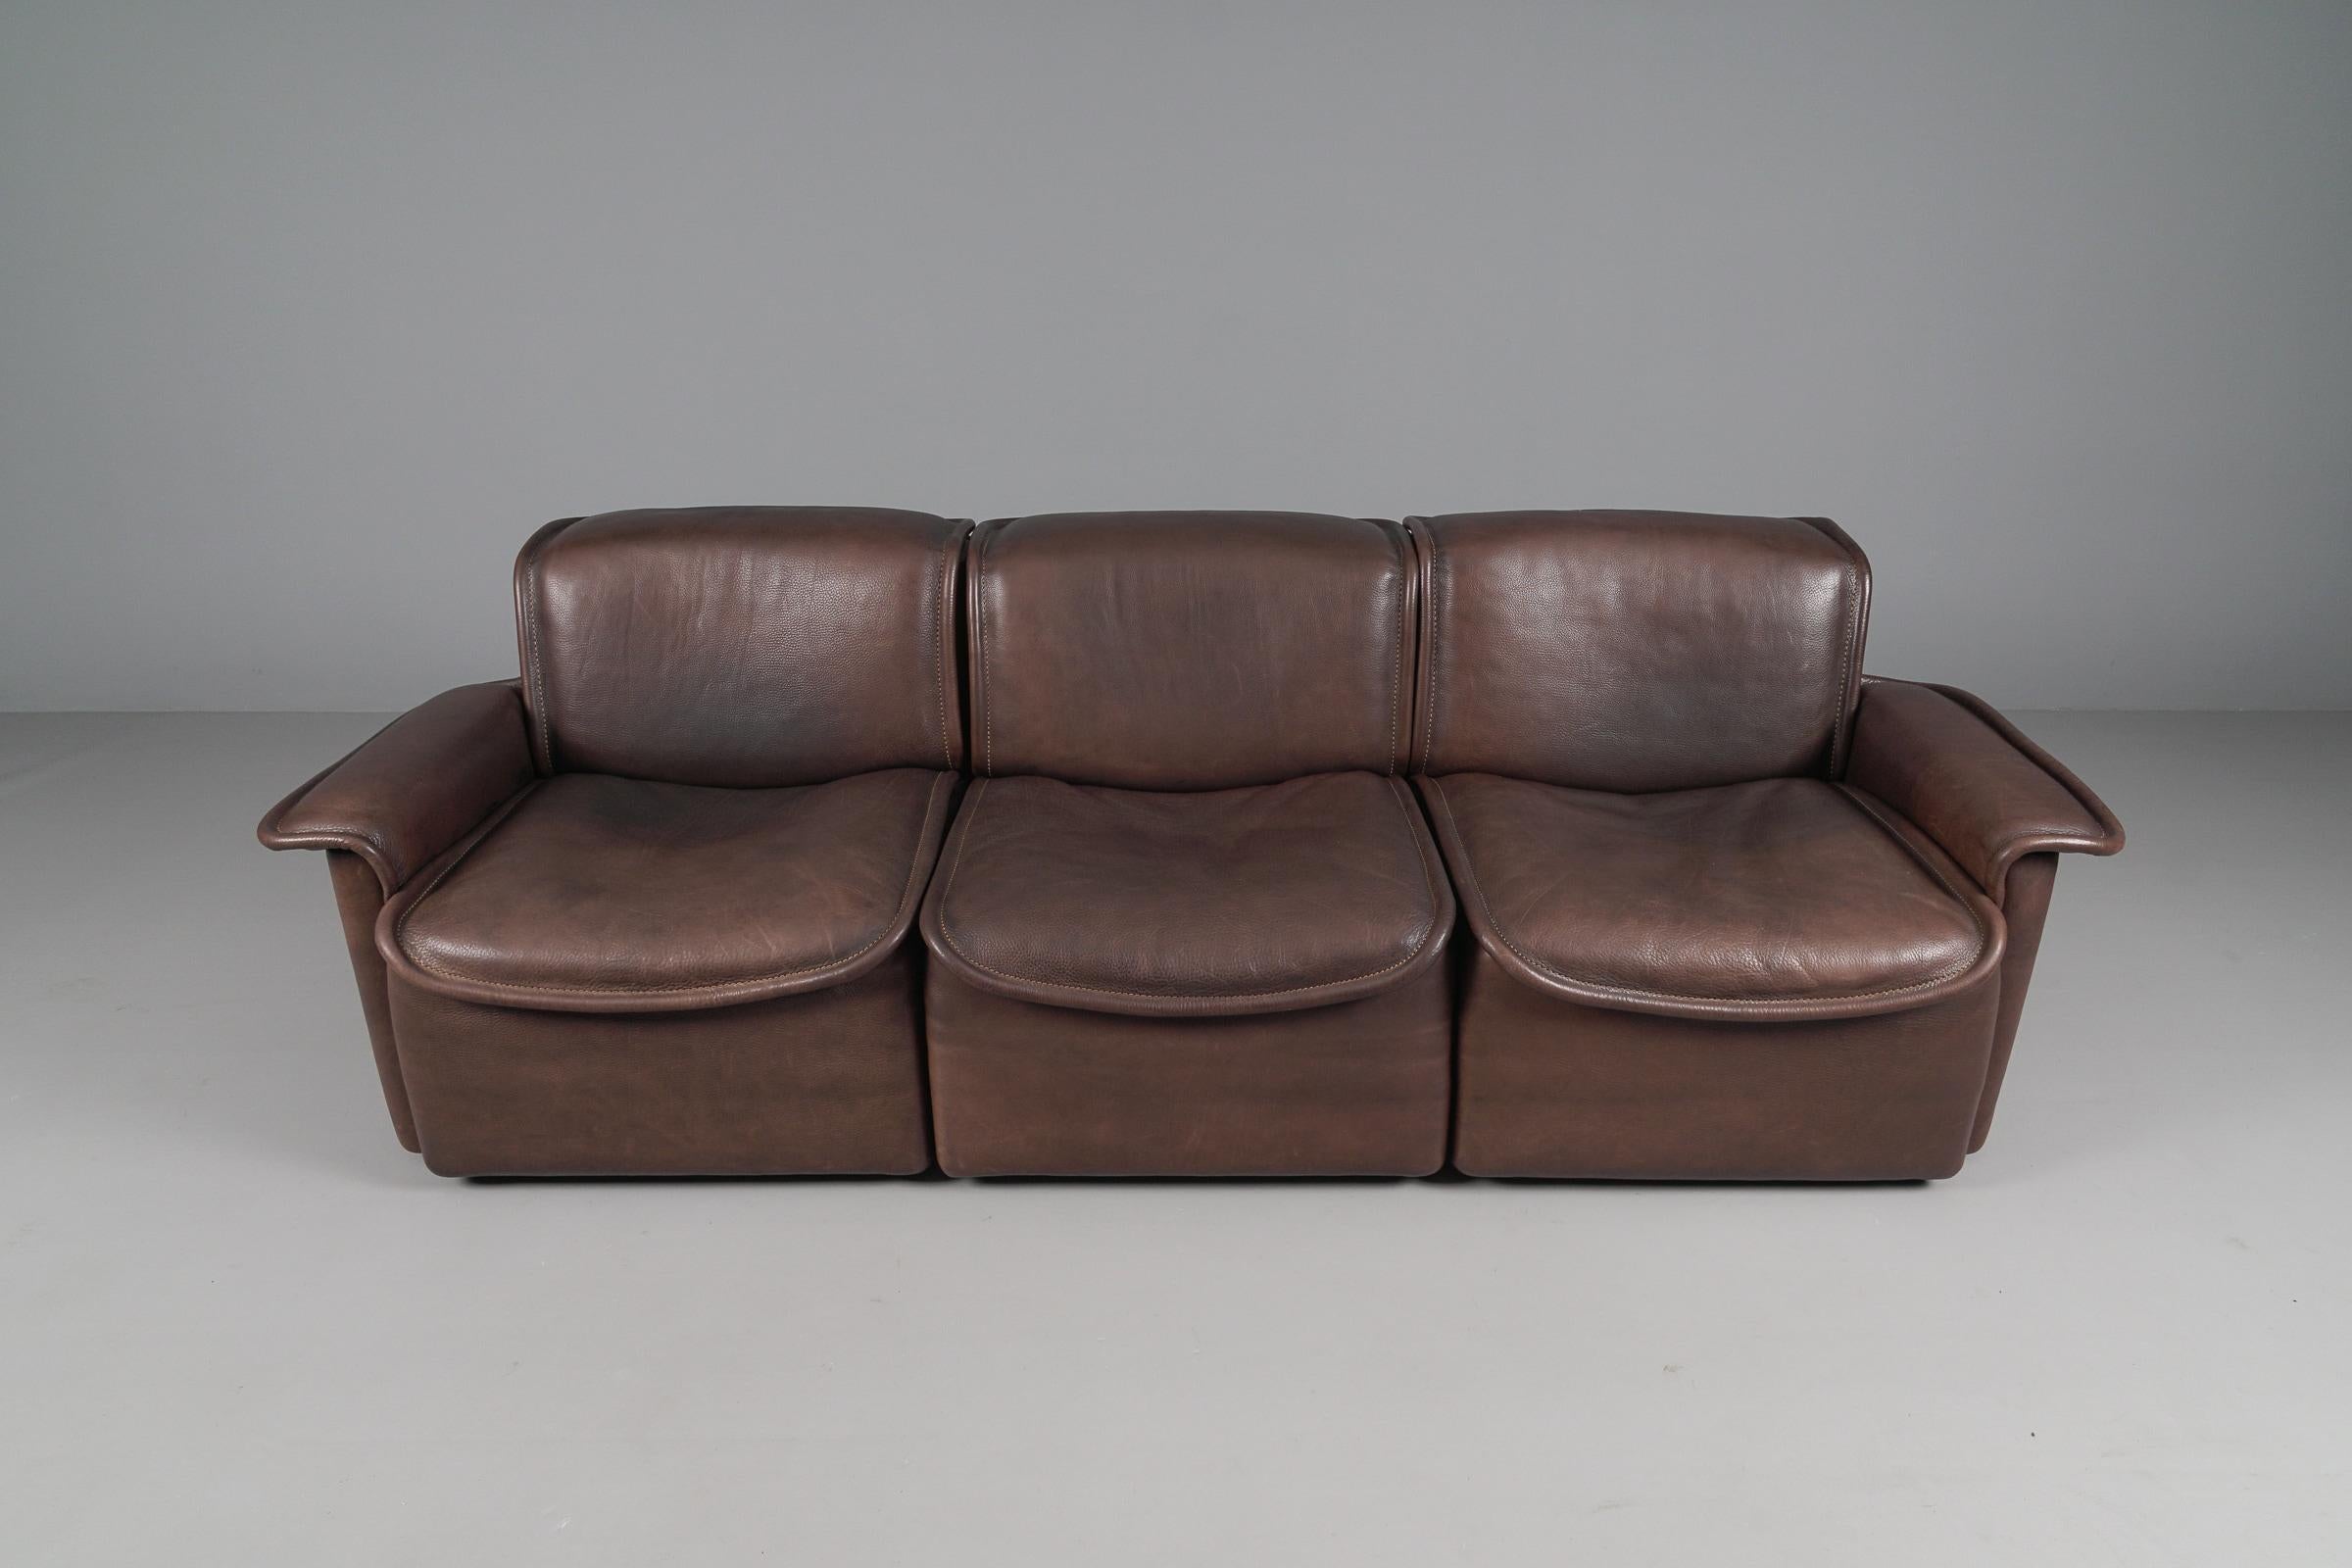 Three Seater Sofa by De Sede DS-12 in Brown Neck Leather, 1960s, Switzerland For Sale 7